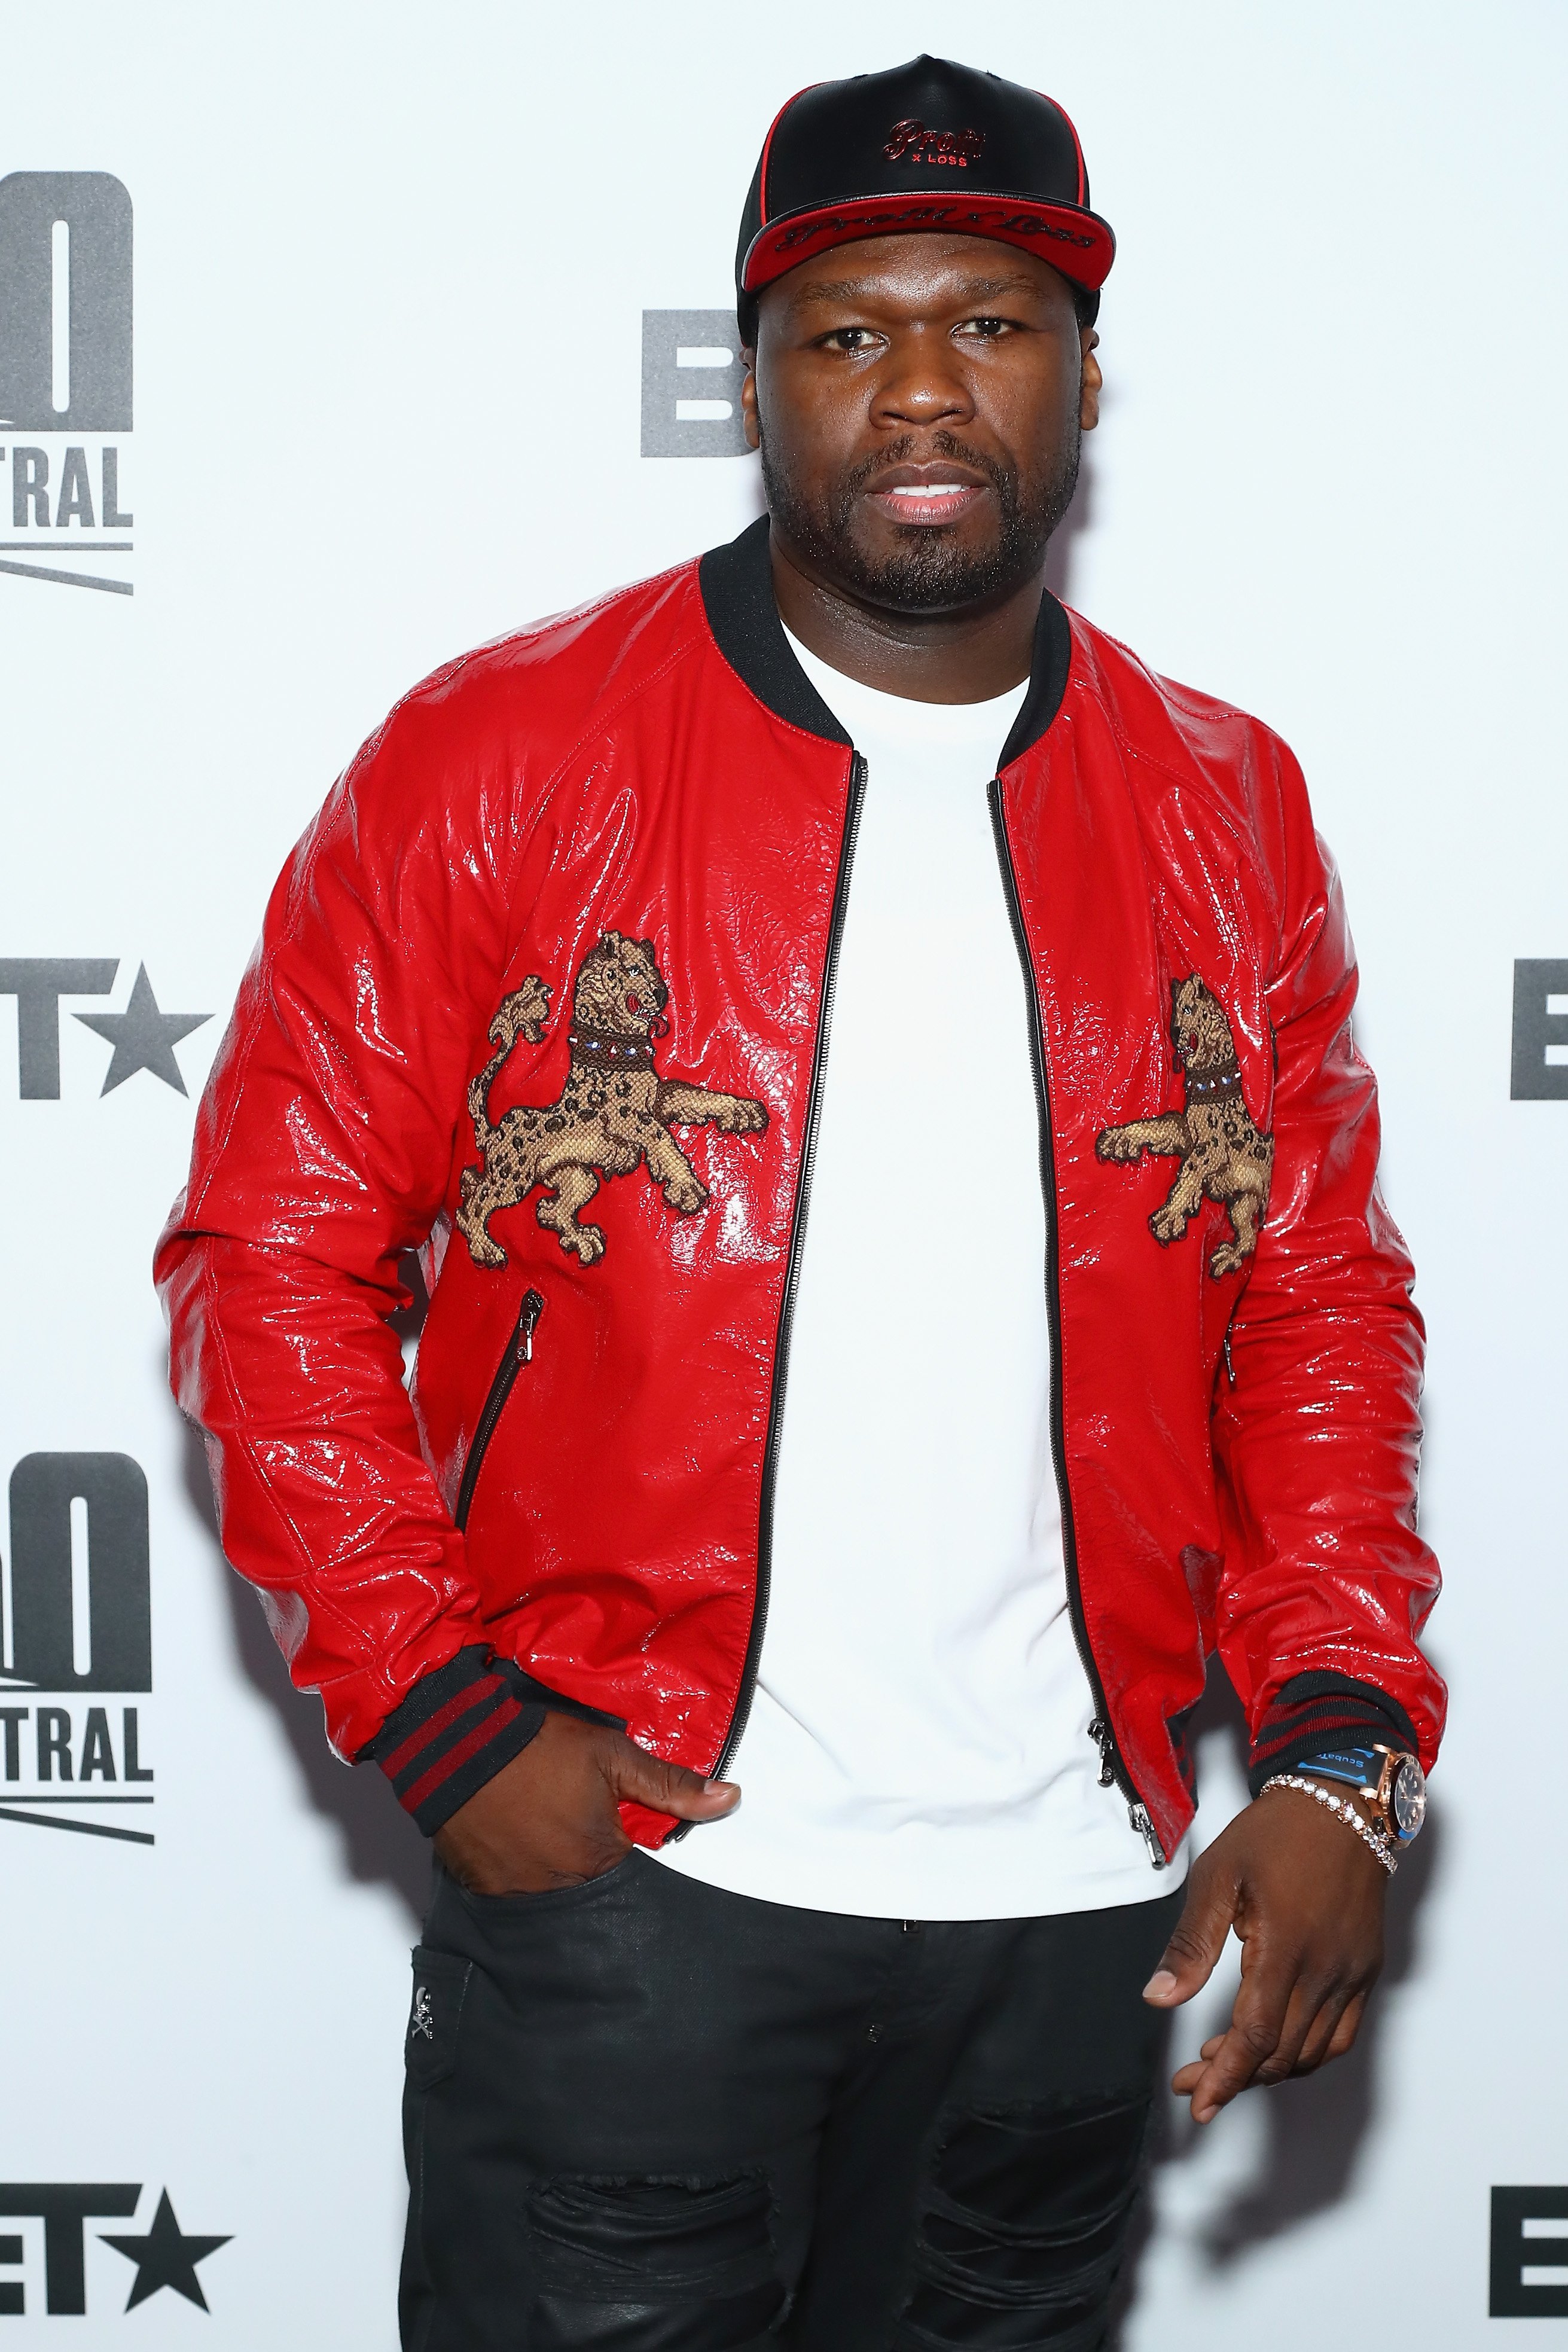 Curtis "50 Cent" Jackson at BET's 50 Central Premiere Party on Sept. 25, 2017 in New York City | Photo: Getty Images